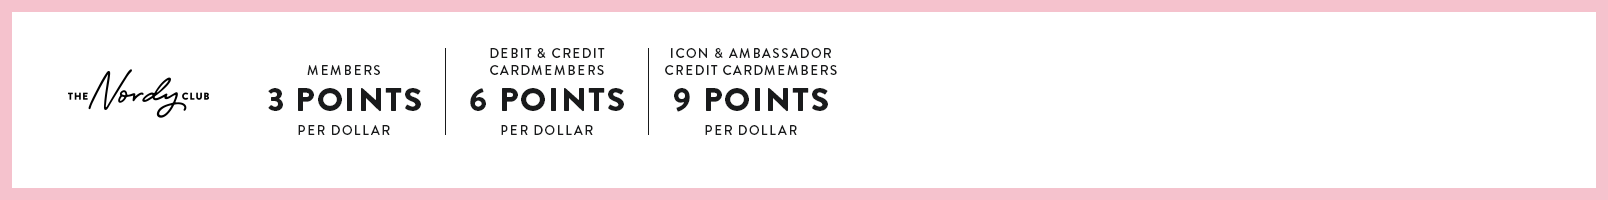 Earn 3 times the points on beauty! Members earn 3 points per dollar; debit and credit cardmembers earn 6; Icon and Ambassador credit cardmembers earn 9.